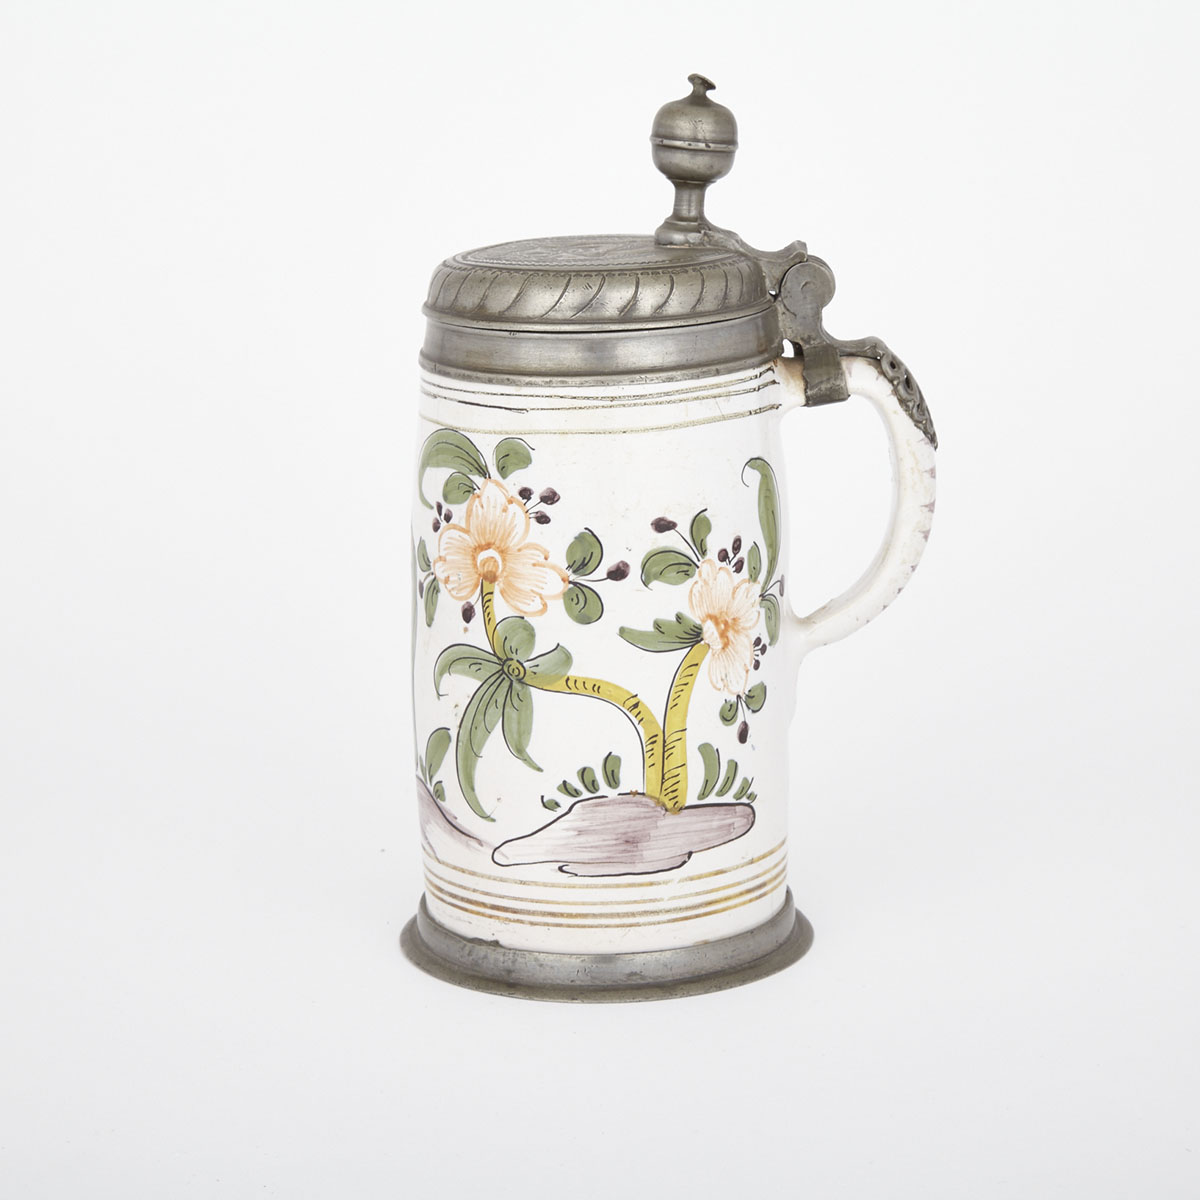 Pewter Mounted Delft Polychrome Tankard, 18th/19th century